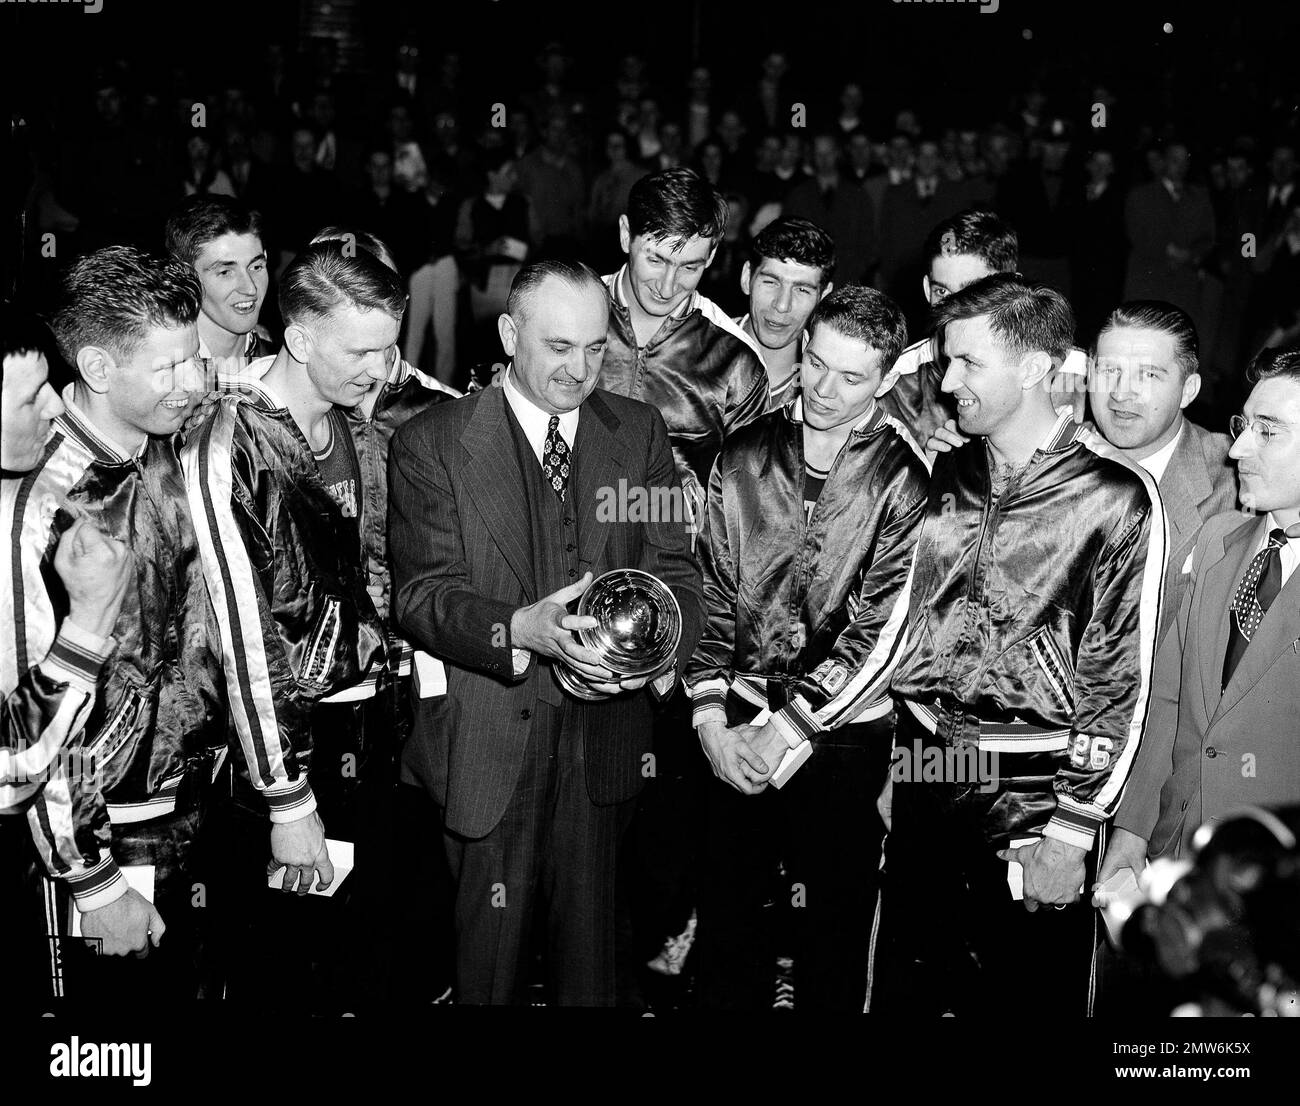 FILE - In this March 26, 1949, file photo, University of Kentucky basketball coach Adolph Rupp and his team admire the NCAA basketball title cup after defeating Oklahoma A&M 46-36 in Seattle. Front row, left to right are: Jim Line, Walter Hirsch, Coach Rupp; Ralph Beard, and Clifford Barker. Star center Alex Groza looks over Rupp's shoulder. The Associated Press is ranking the top 100 college basketball programs of all time using 68 years of data from the AP Top 25 poll. (AP Photo/Paul Wagner, File) Stock Photo